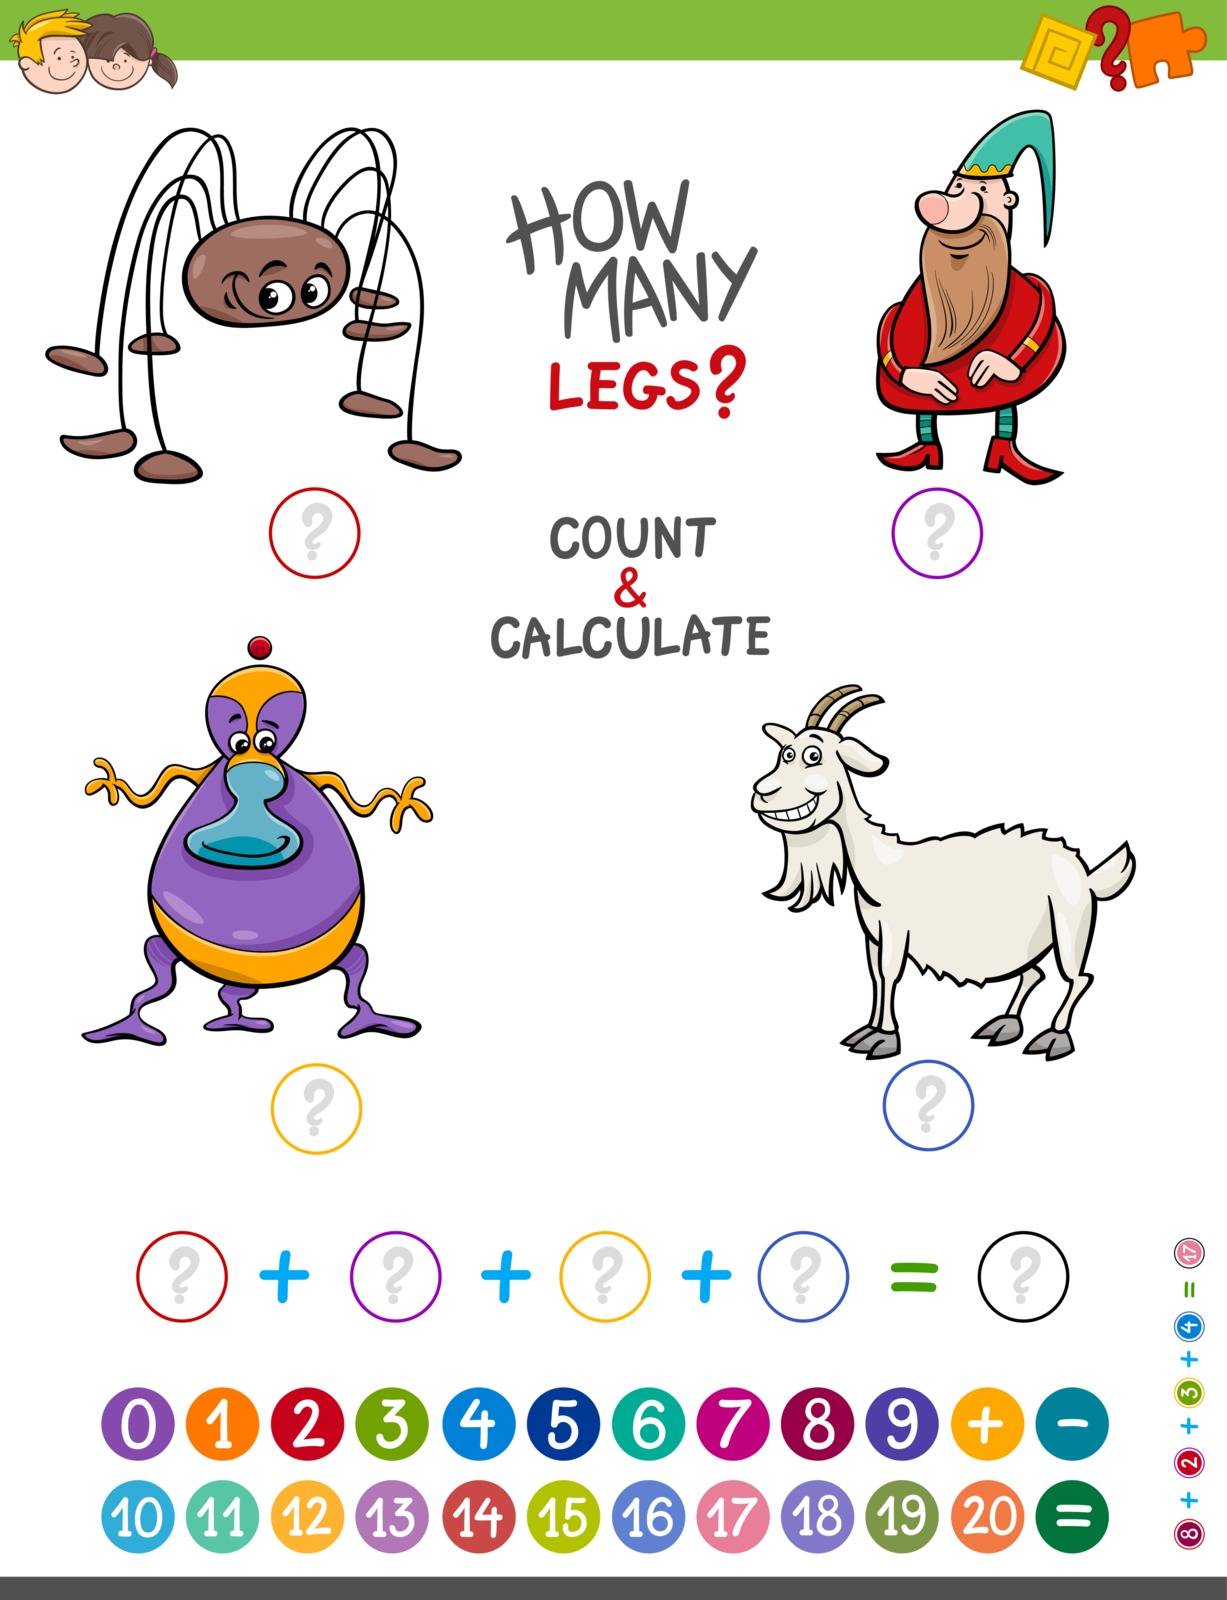 Cartoon Illustration of Educational Mathematical Counting and Addition Game for Children with Funny Characters